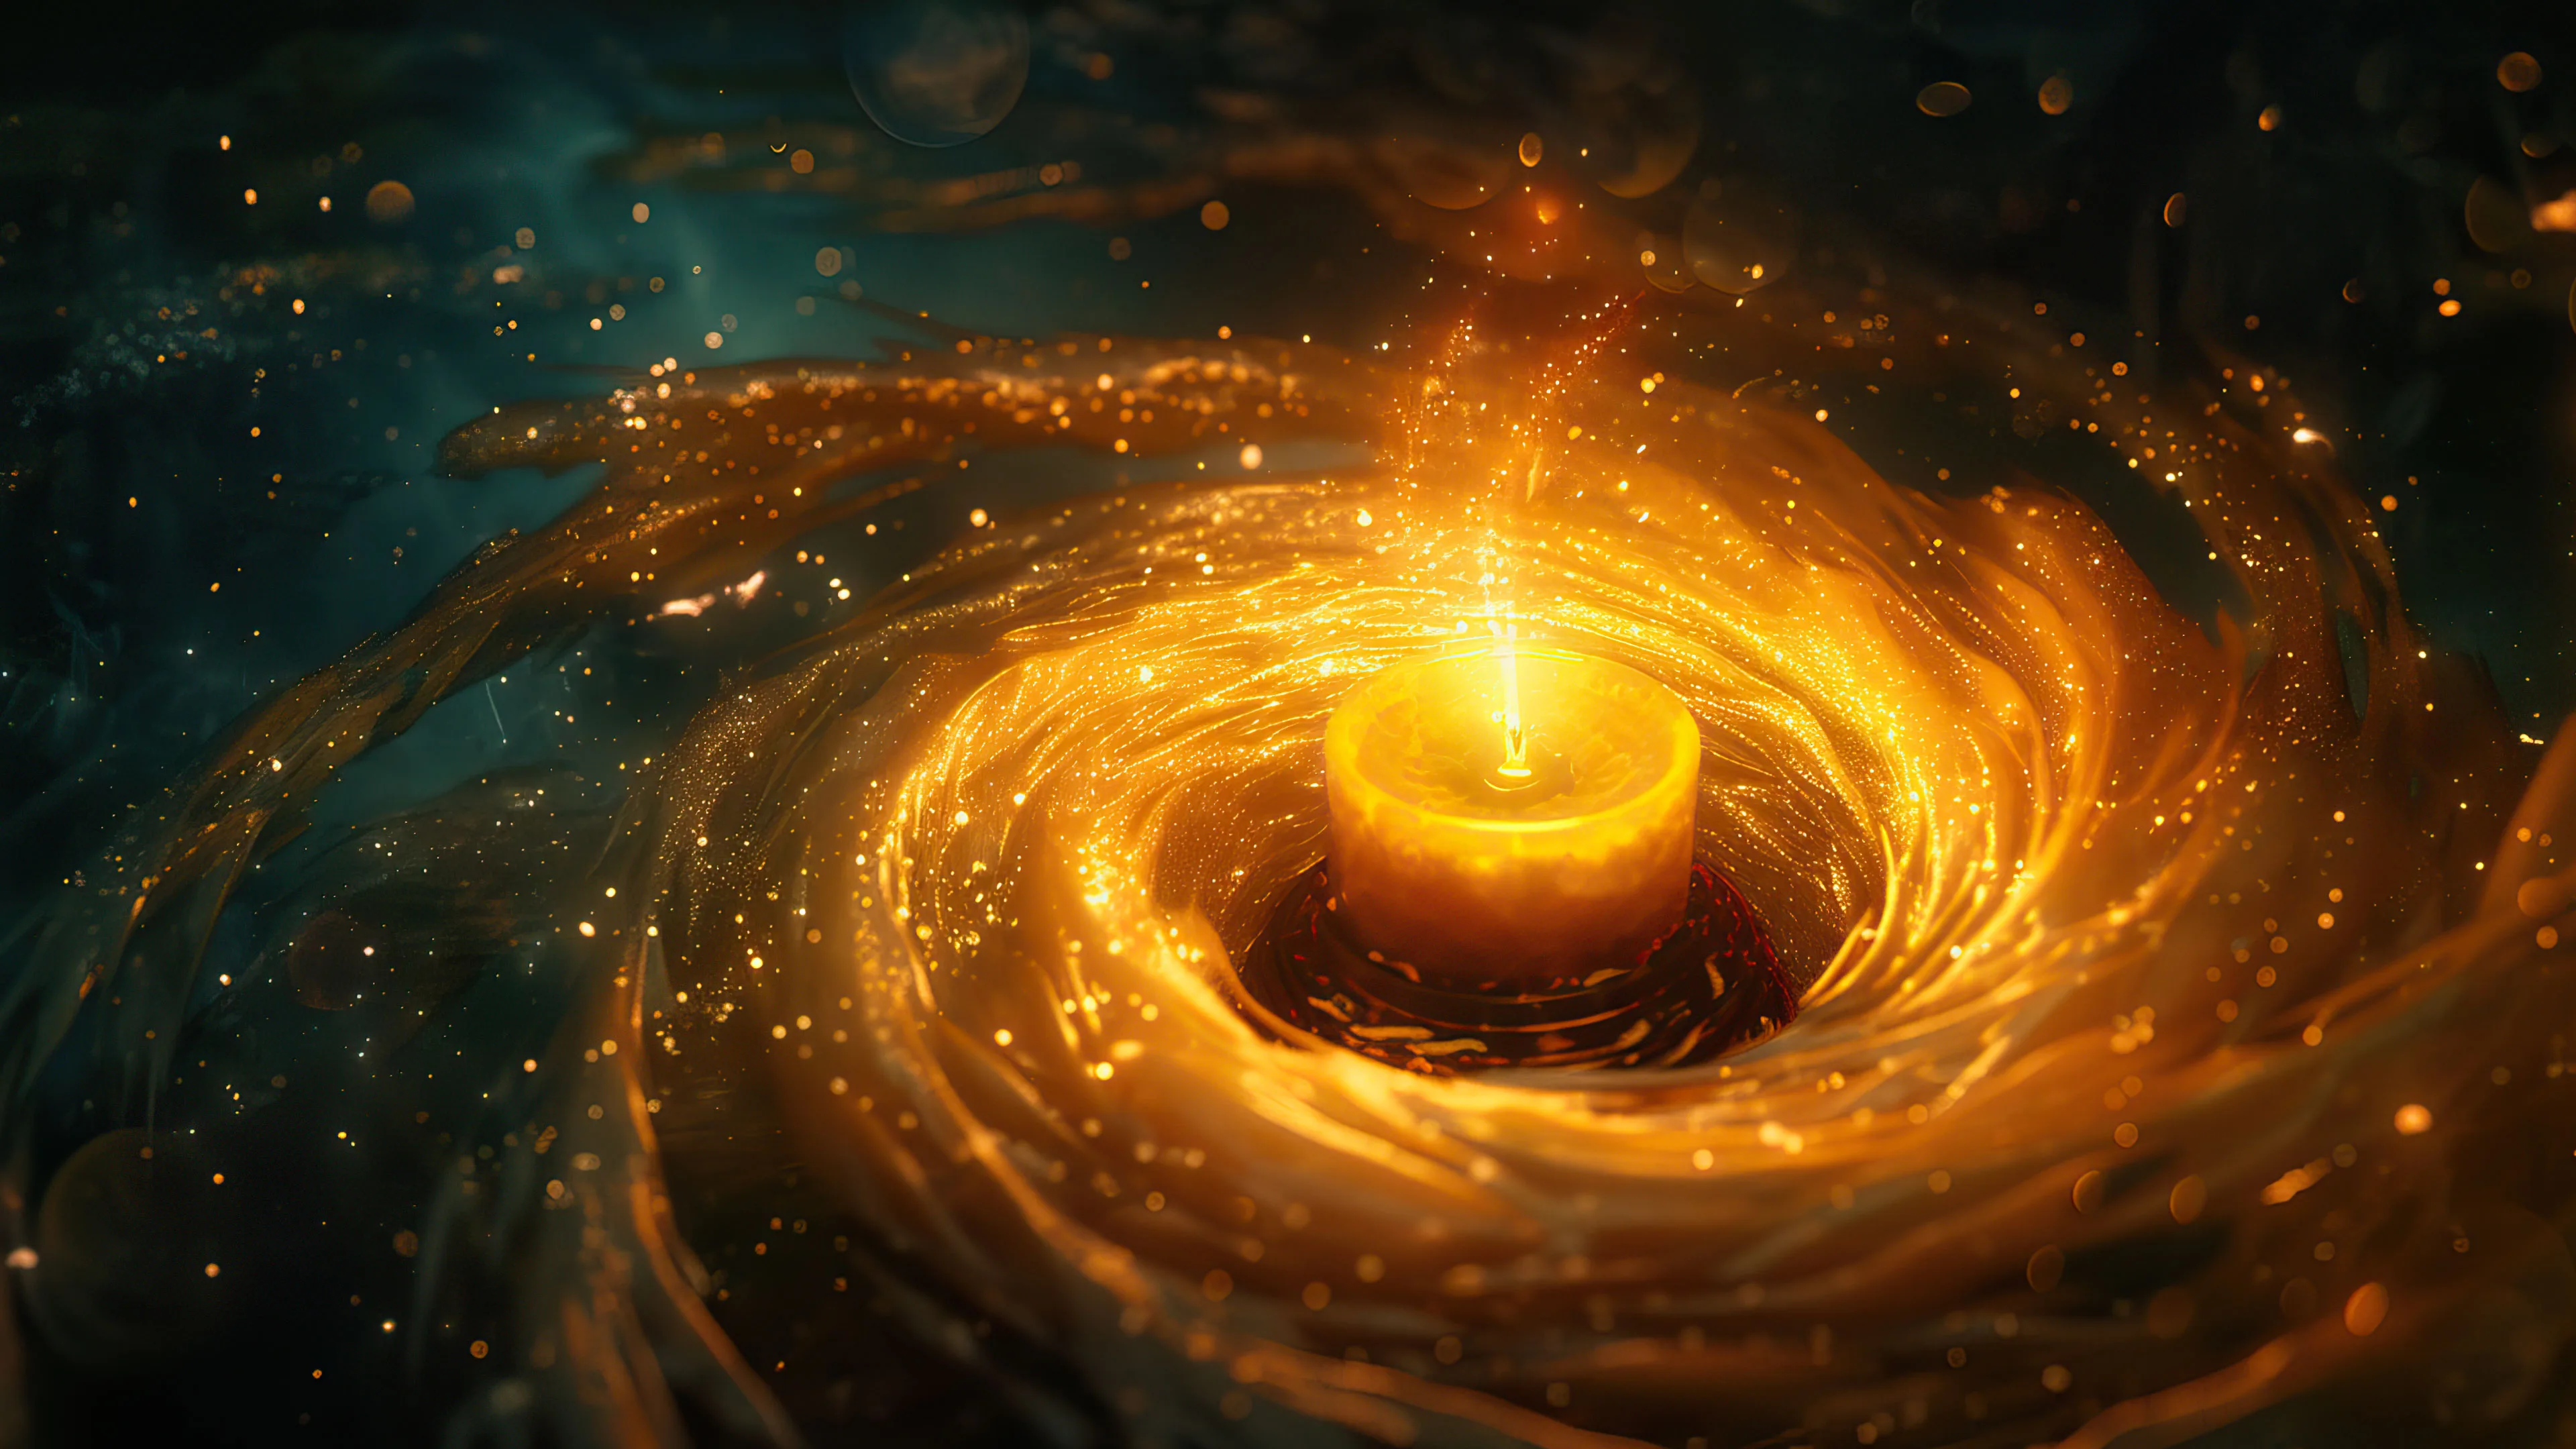 A mesmerizing 4K wallpaper featuring a swirl of golden candlelight radiating warmth and elegance. Ideal for adding a touch of sophistication to your desktop or mobile screen.